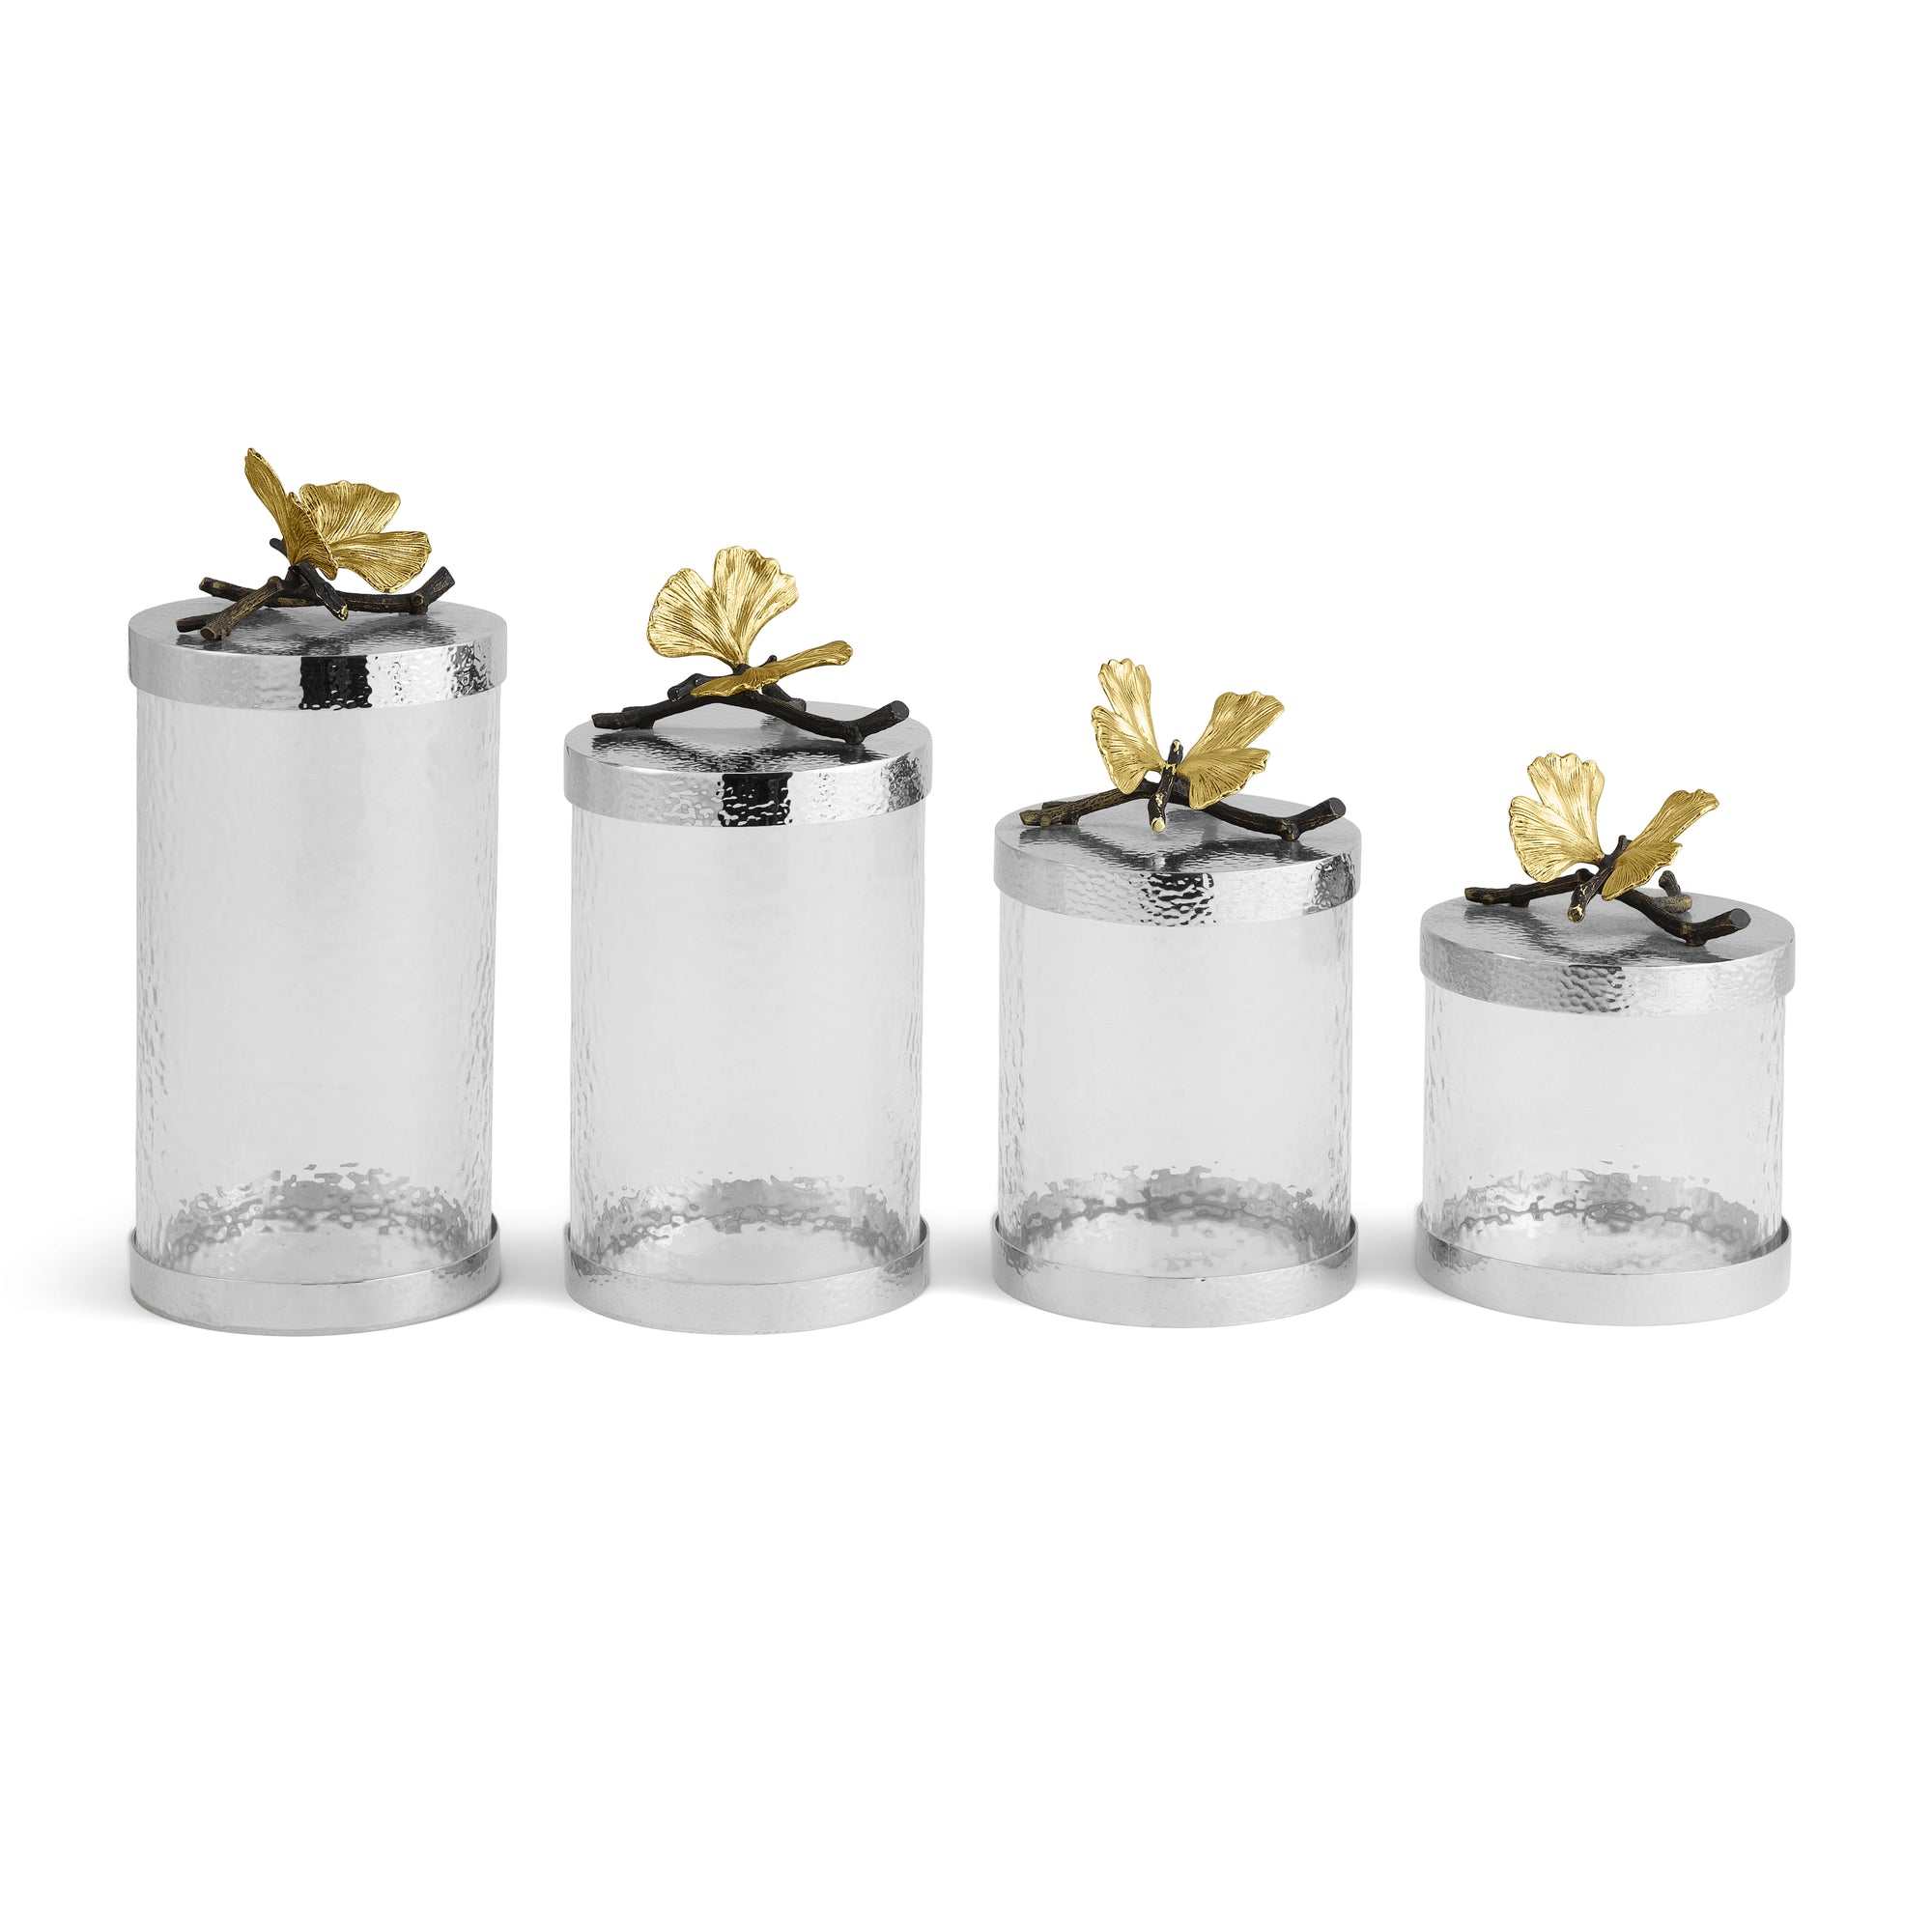 Michael Aram Butterfly Ginkgo Canisters